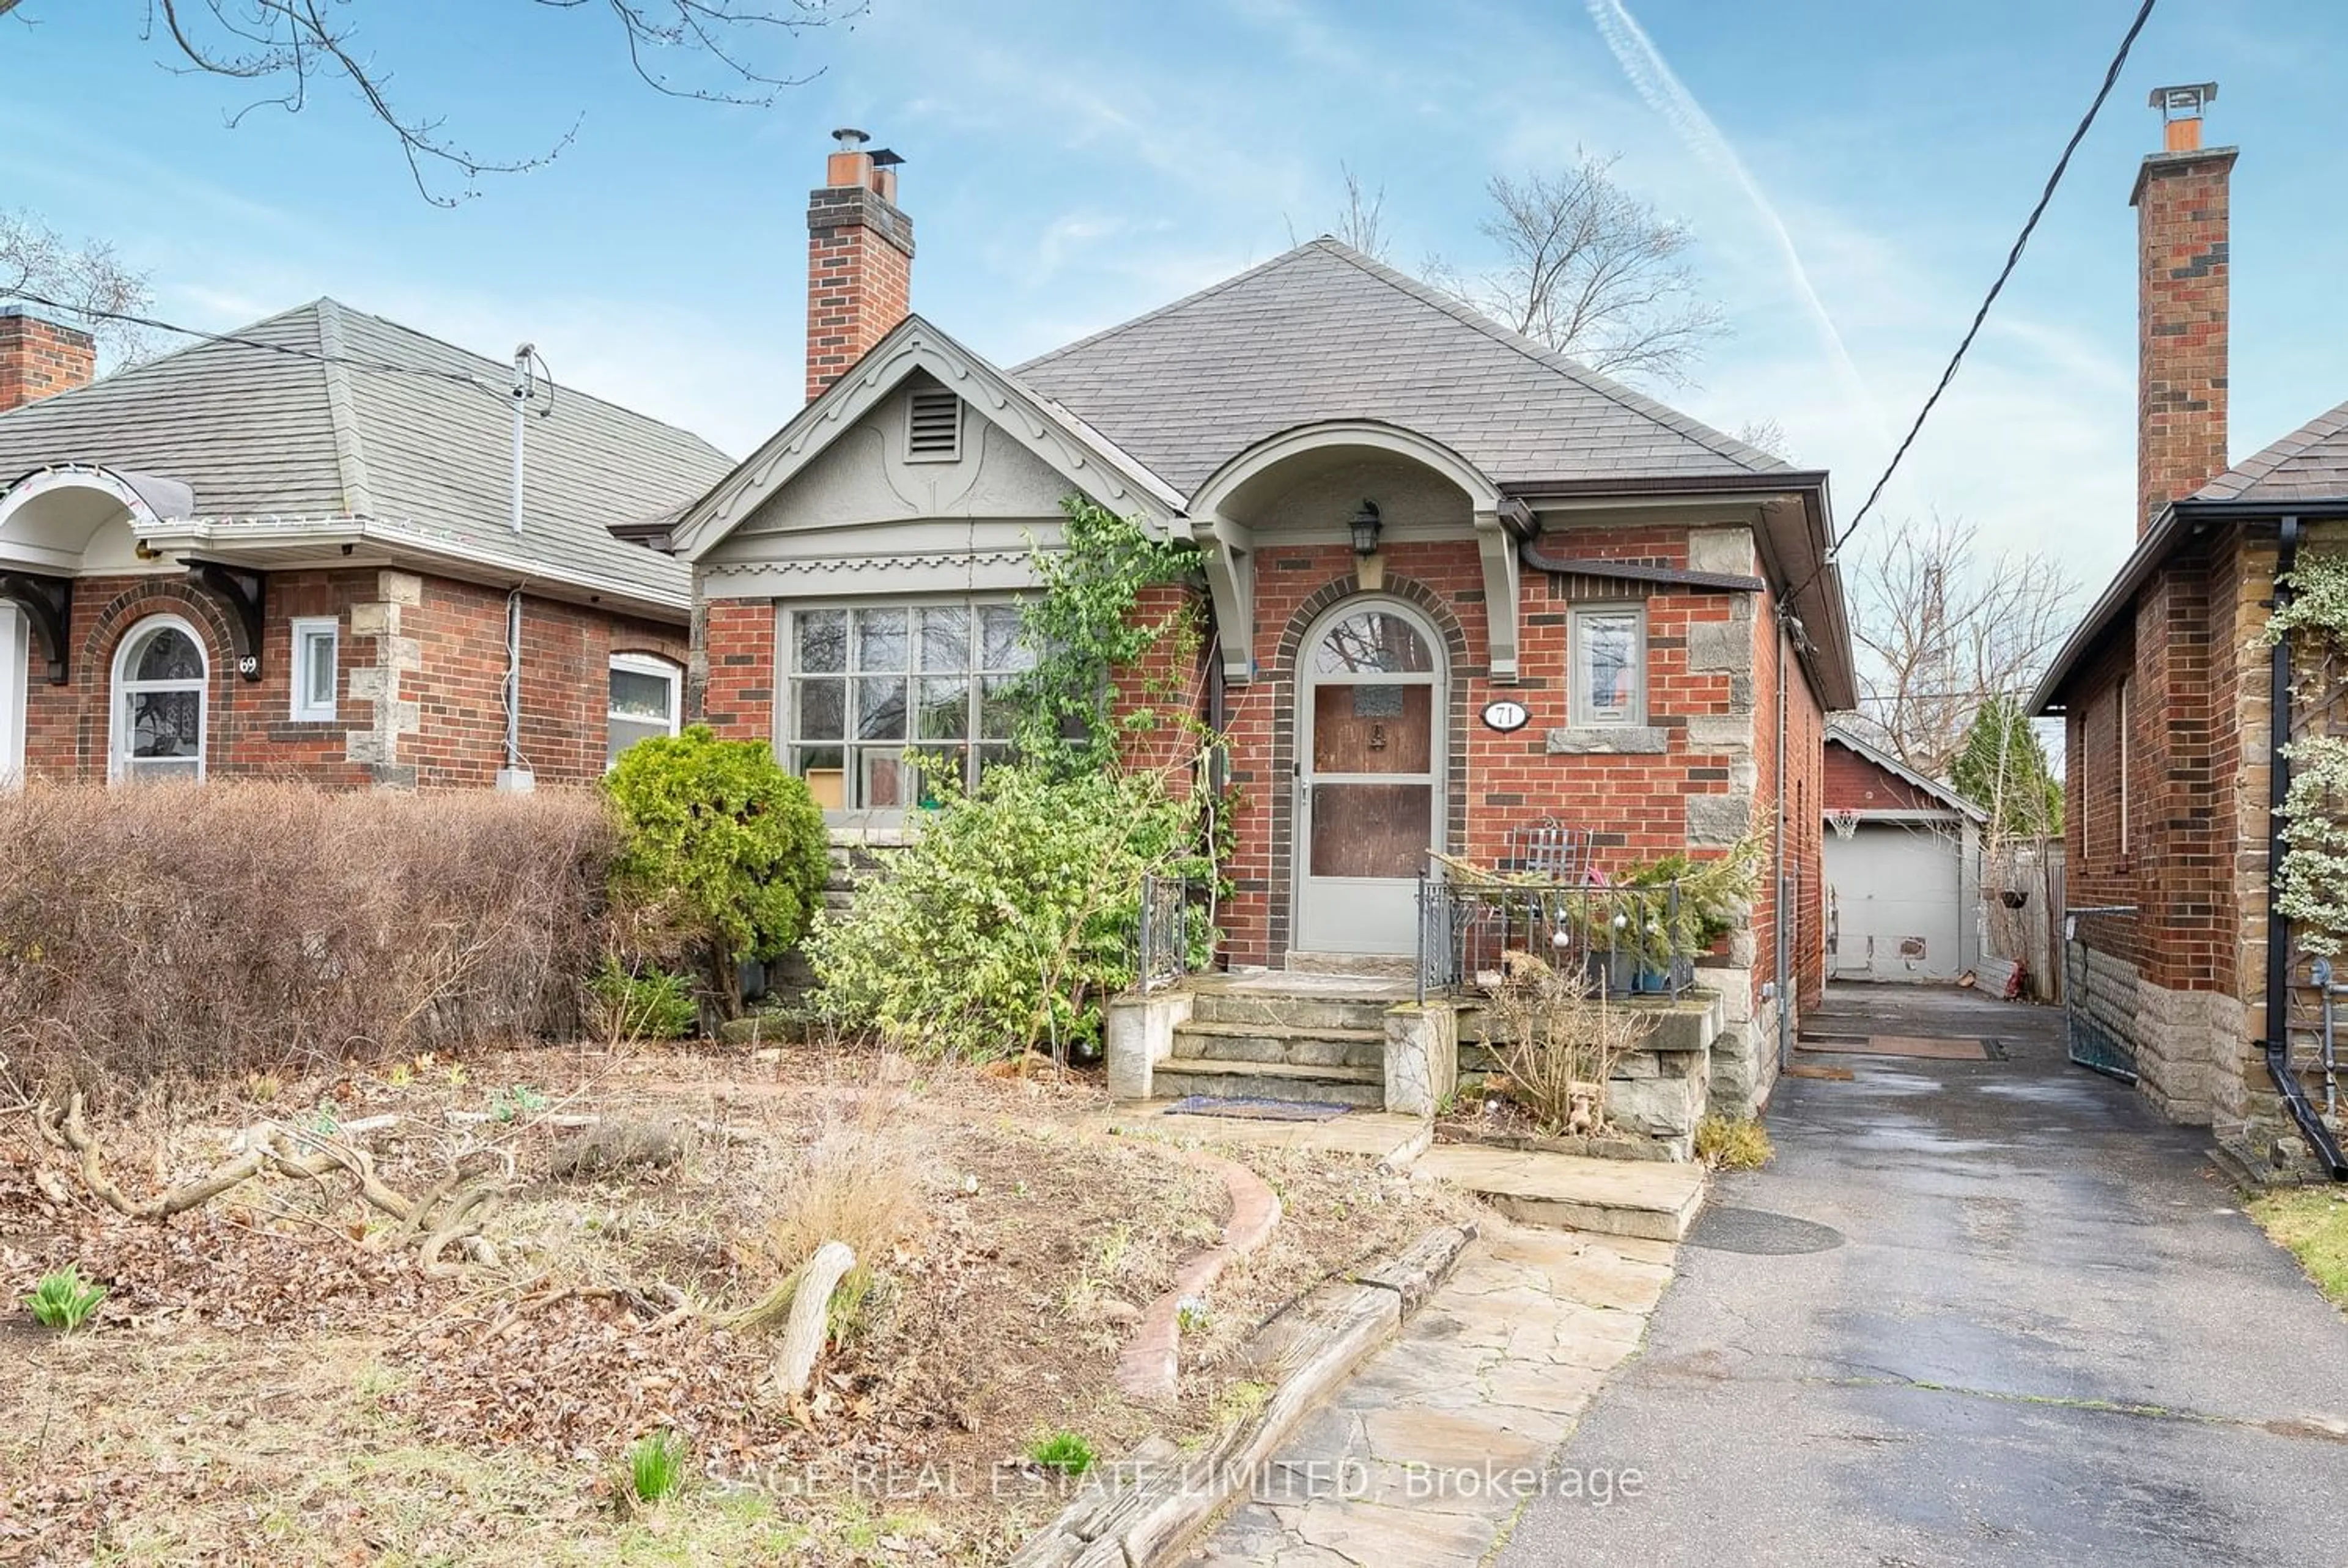 Home with brick exterior material for 71 Delemere Ave, Toronto Ontario M6N 1Z8